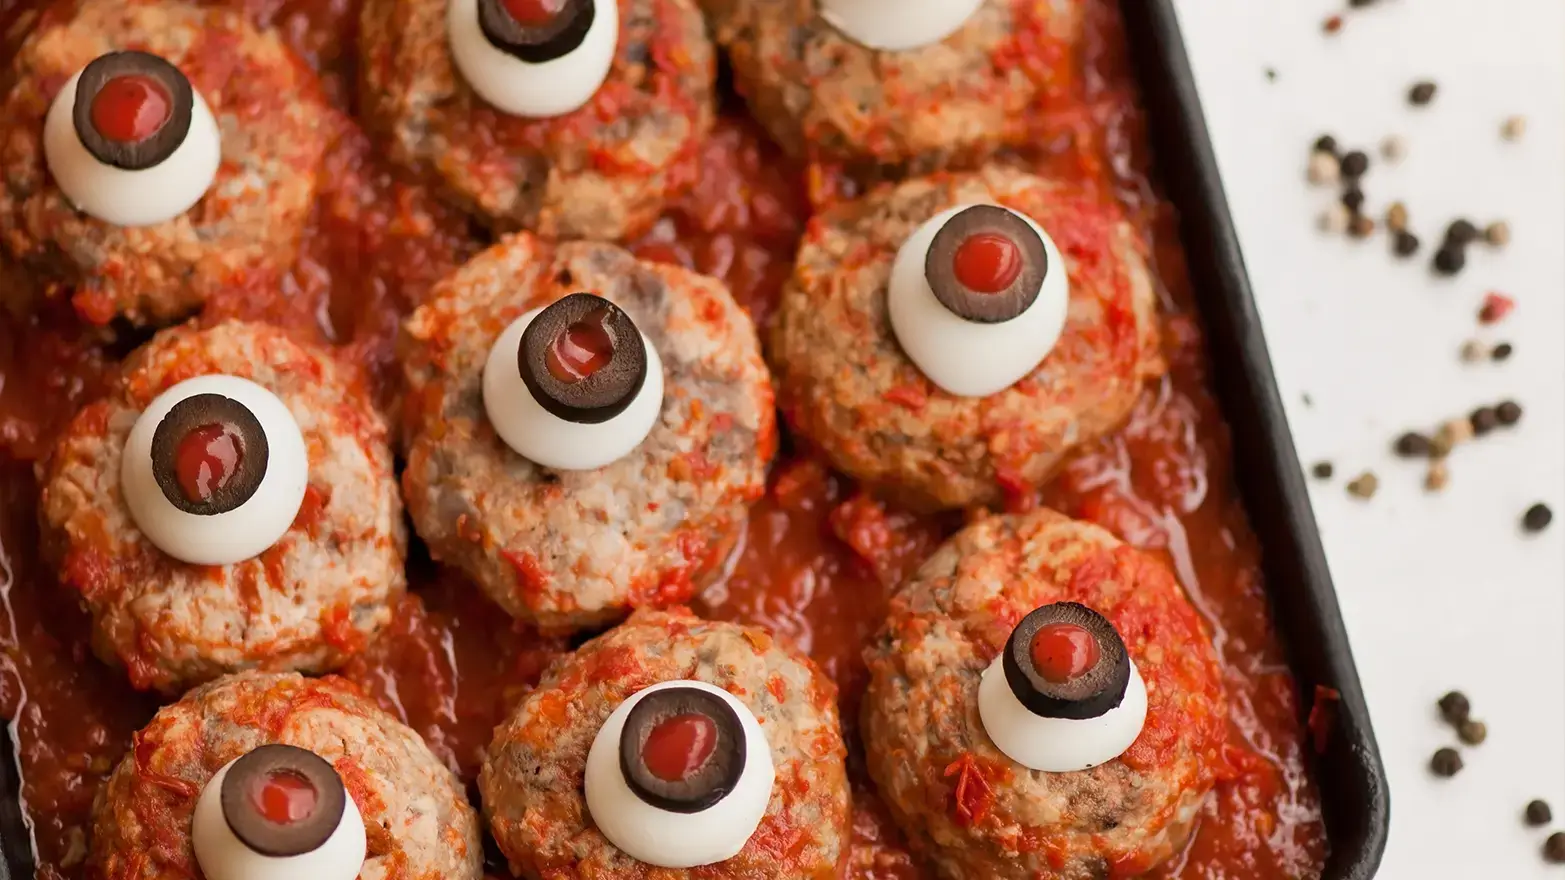 Meatballs with mozzarella and stuffed olive eyes